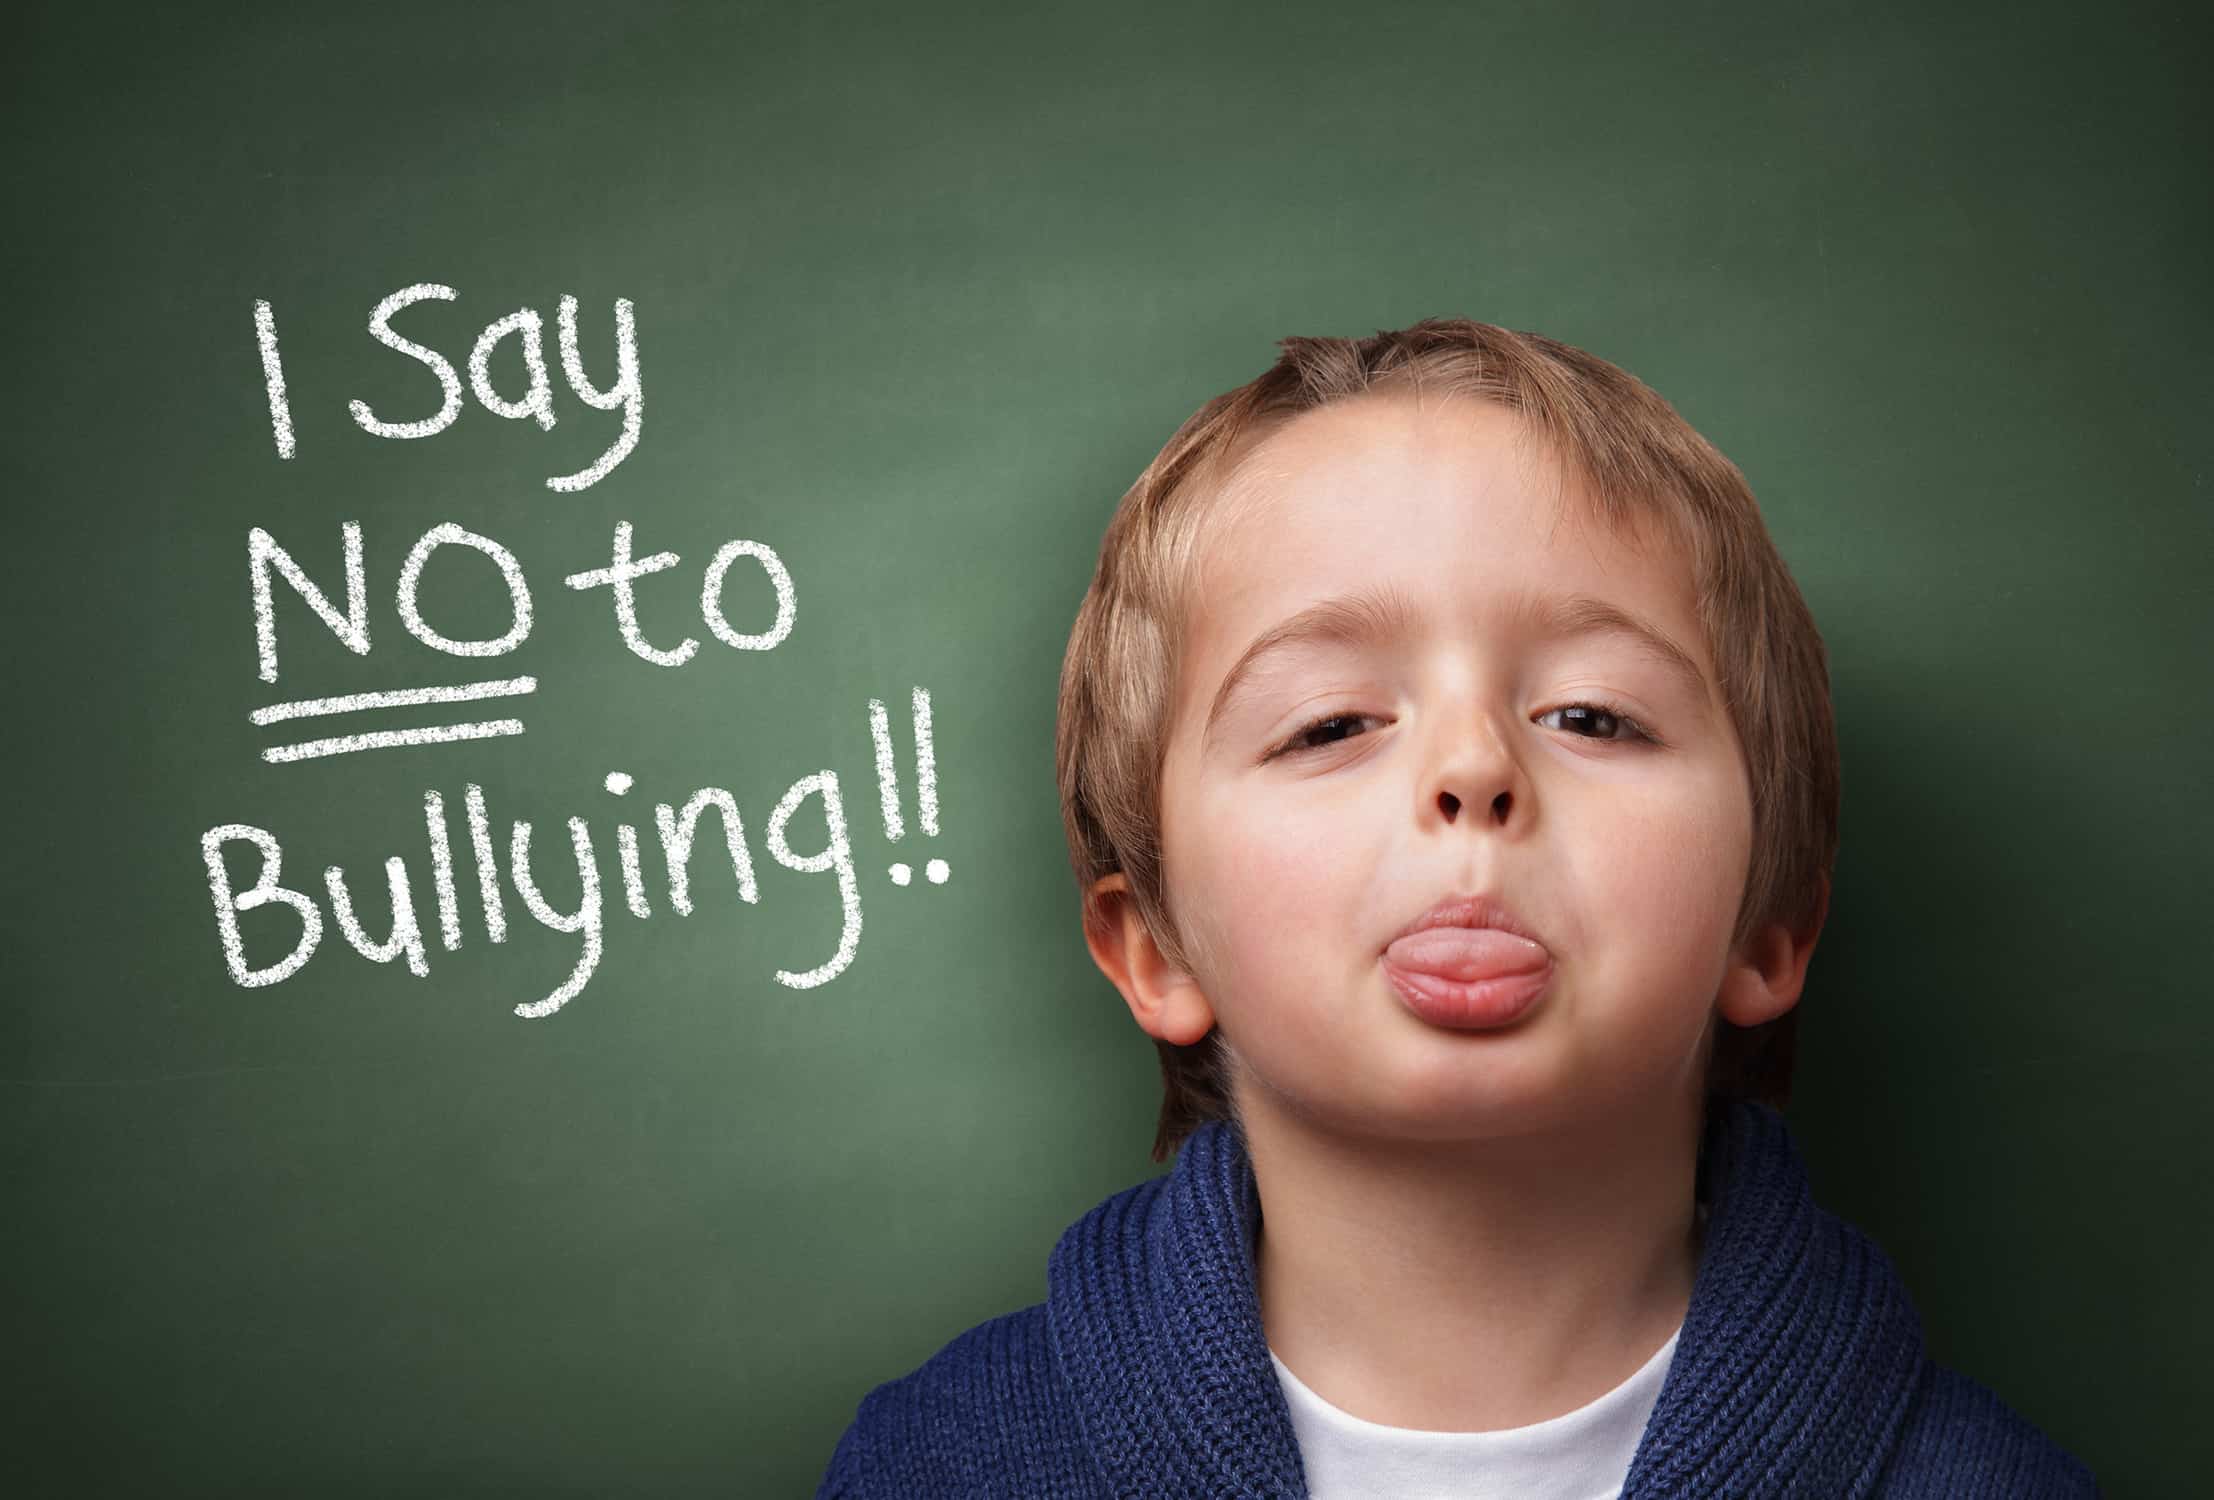 Kid sicking his tongue out in front of a chalkboard that says "I say No to Bullying!"